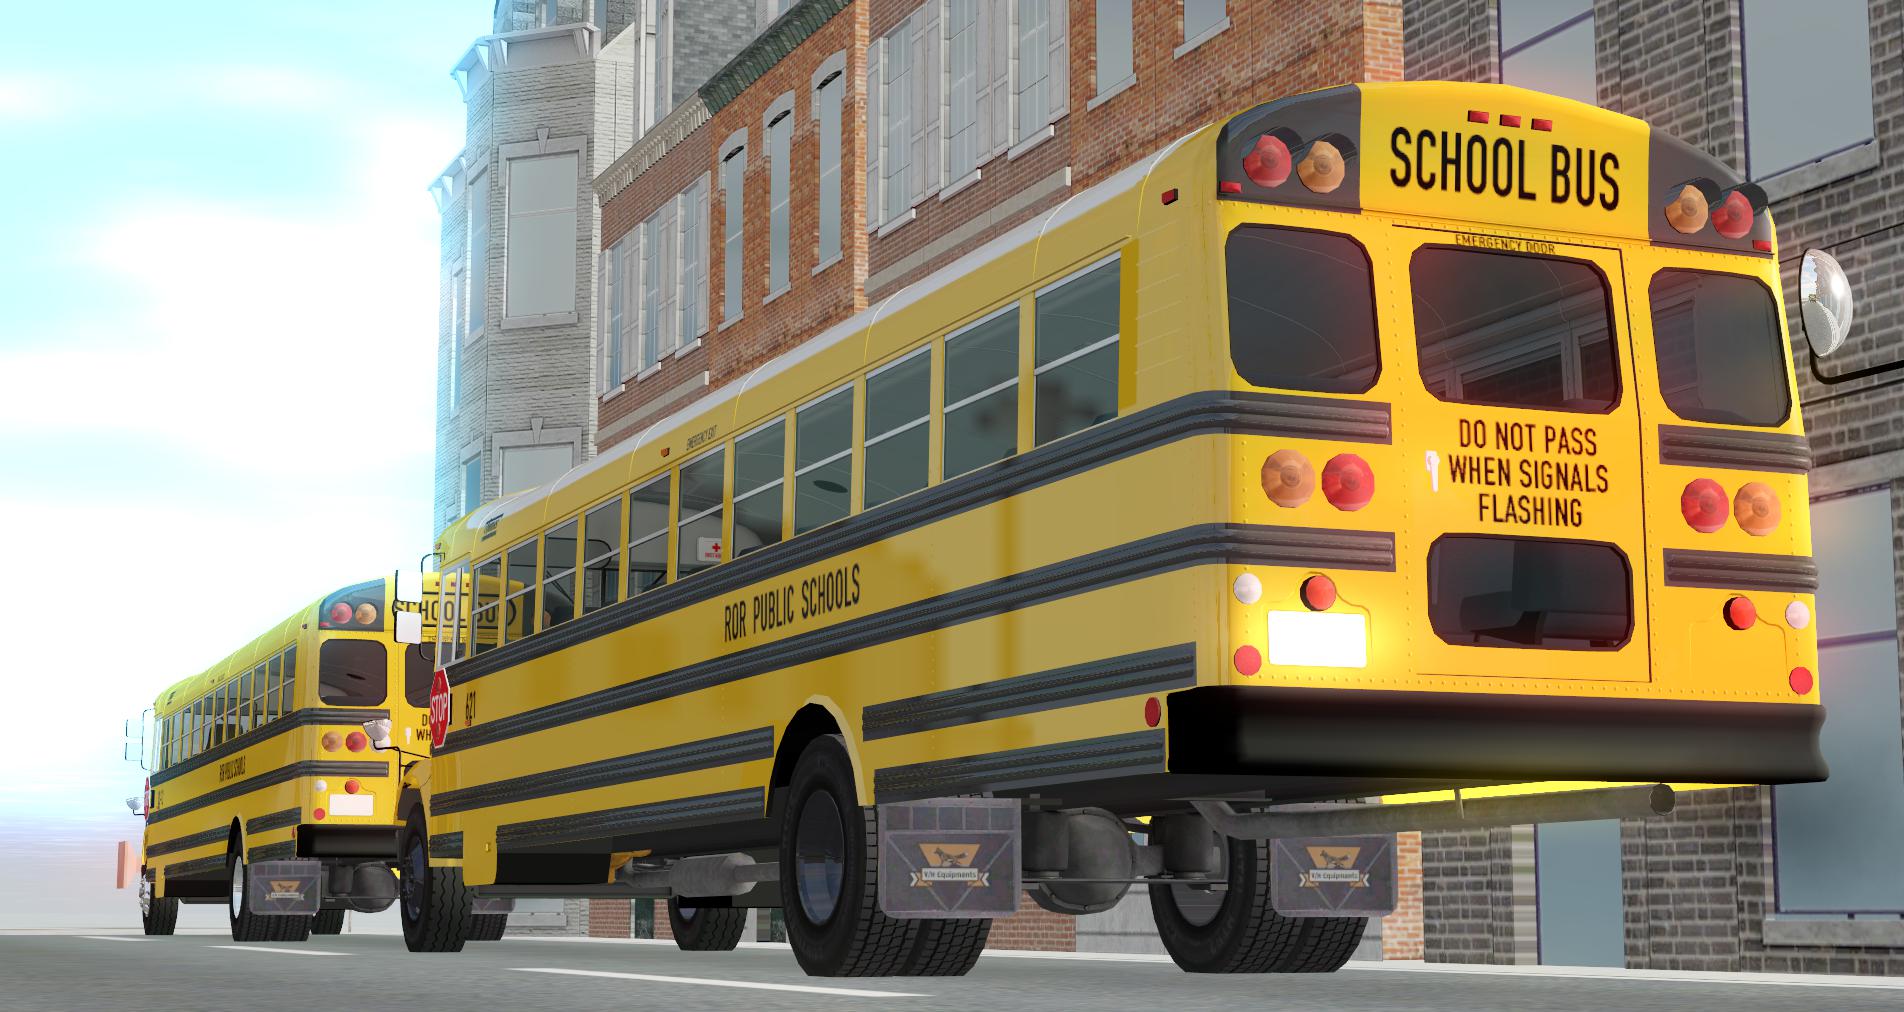 rigs of rods school bus group